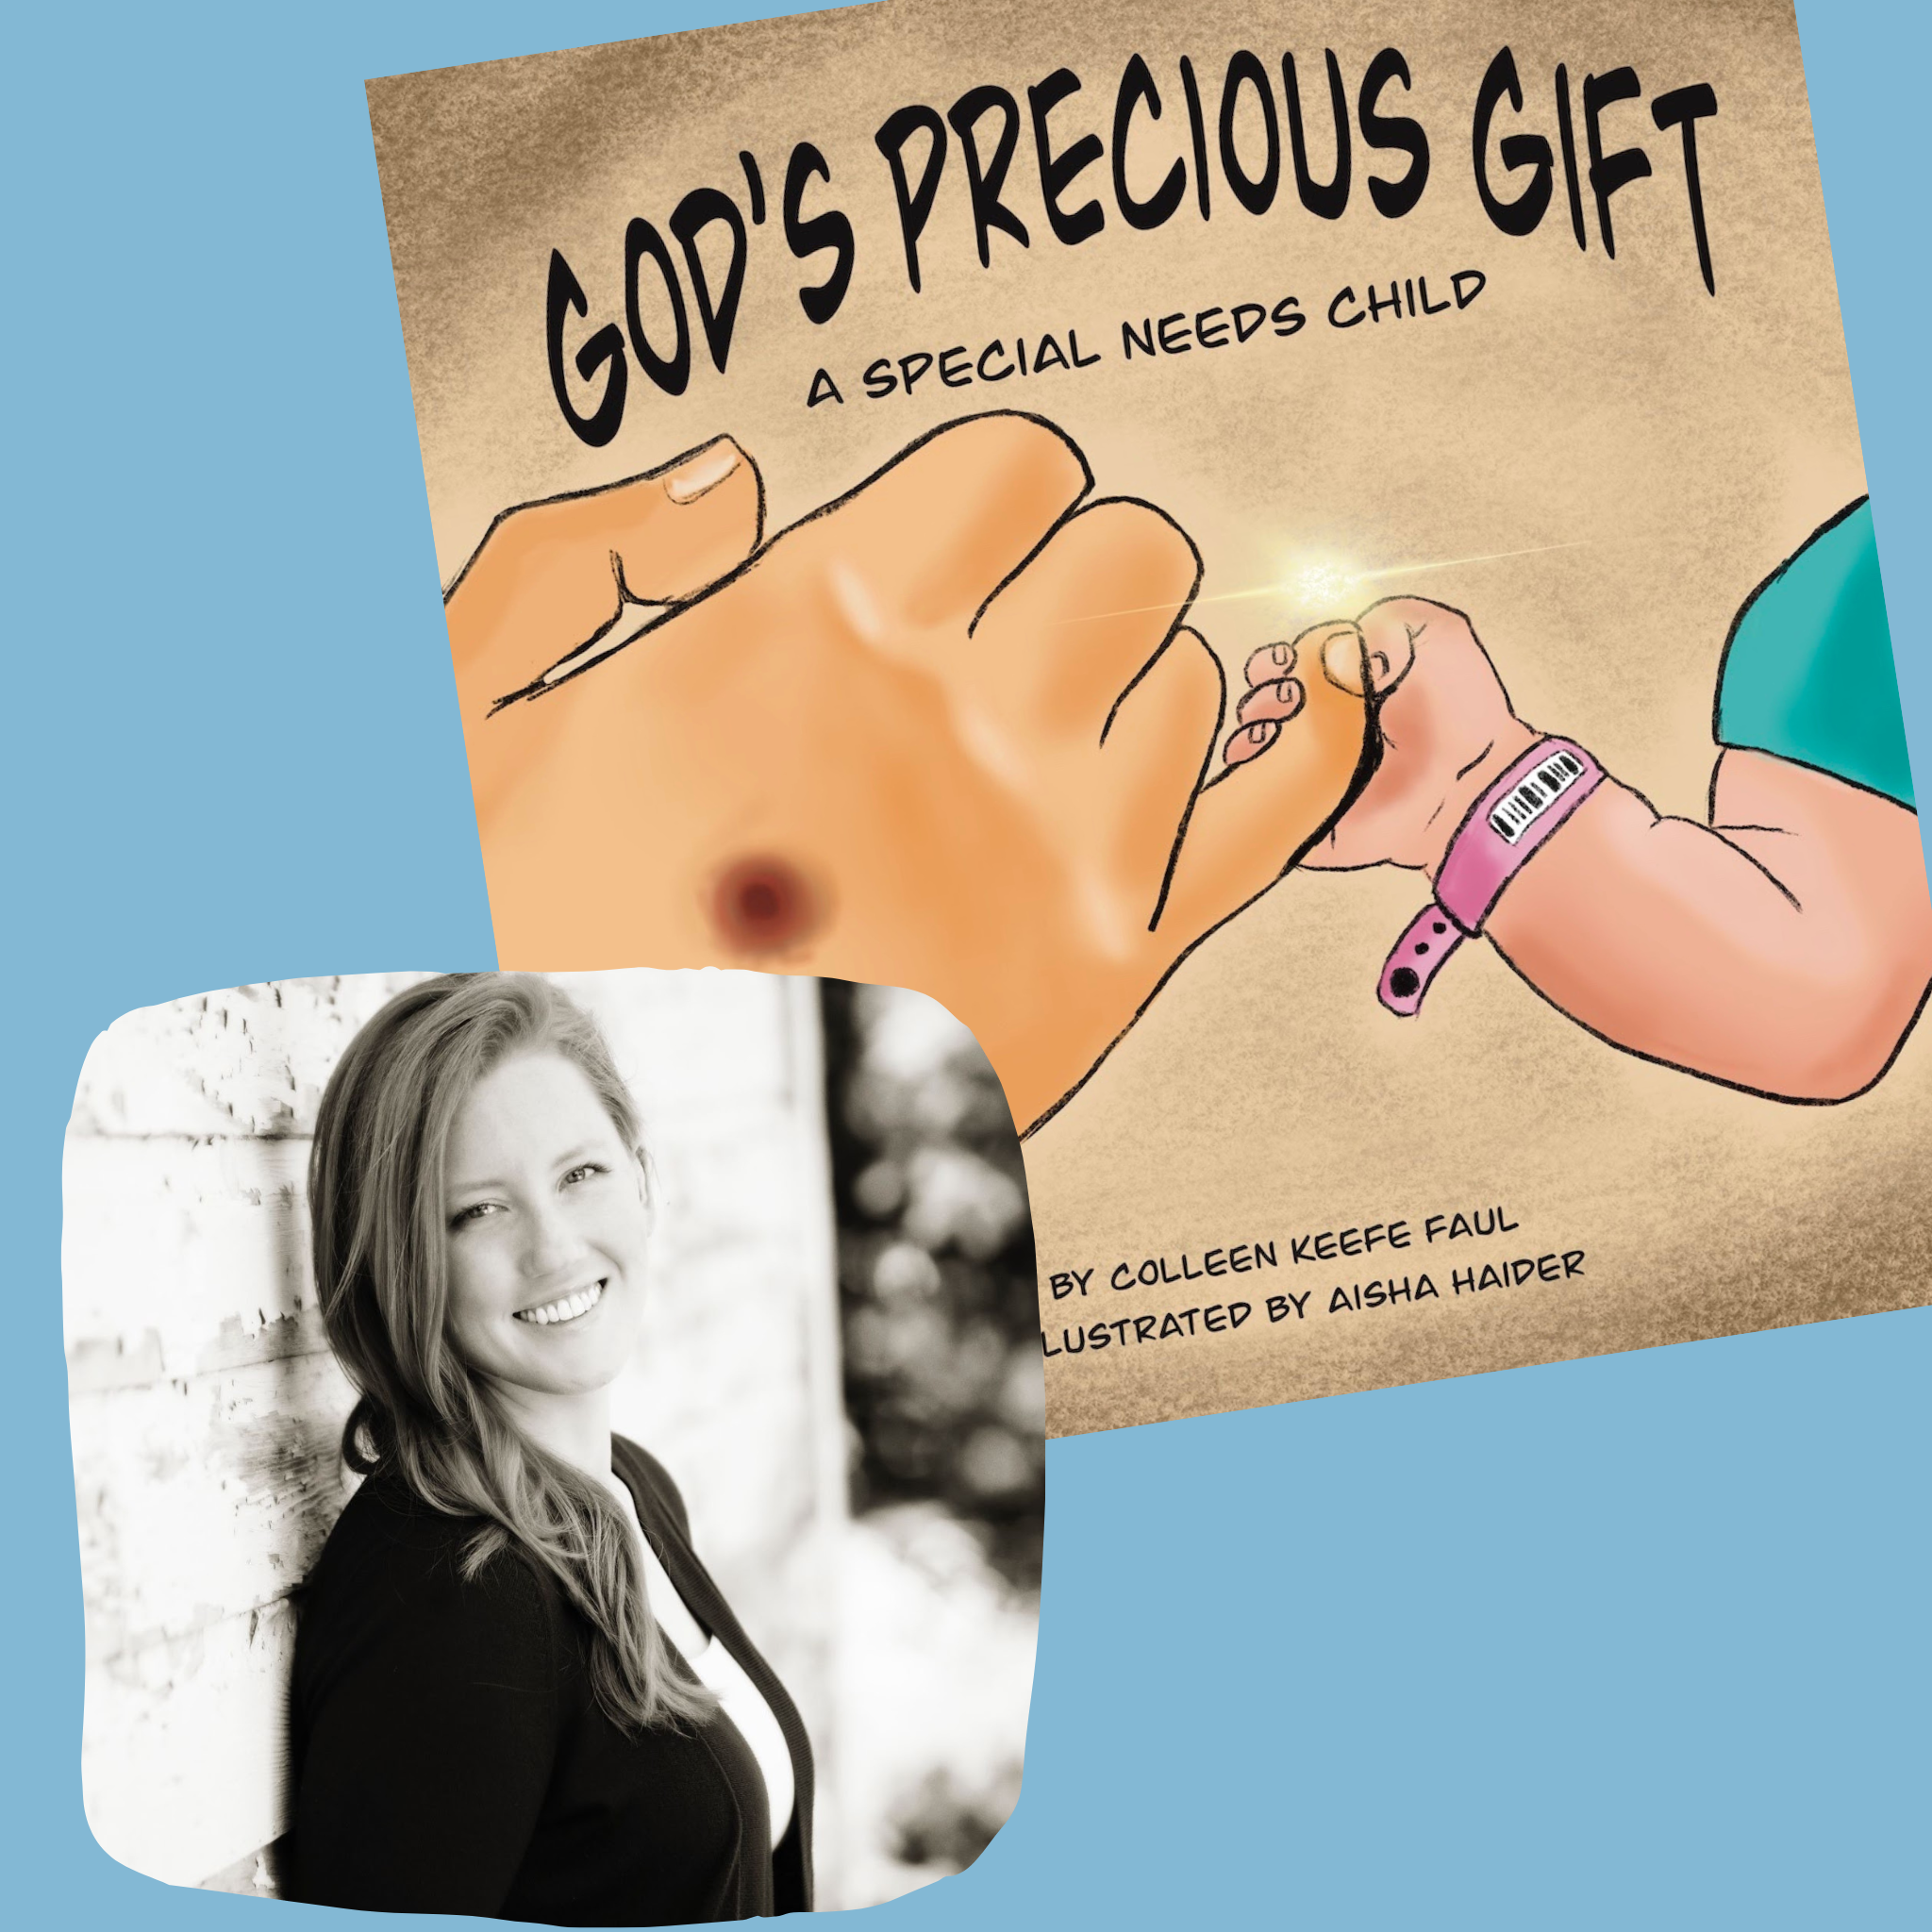  Colleen Keefe Faul and her self published book "God's Precious Gift- A Special Needs Child"